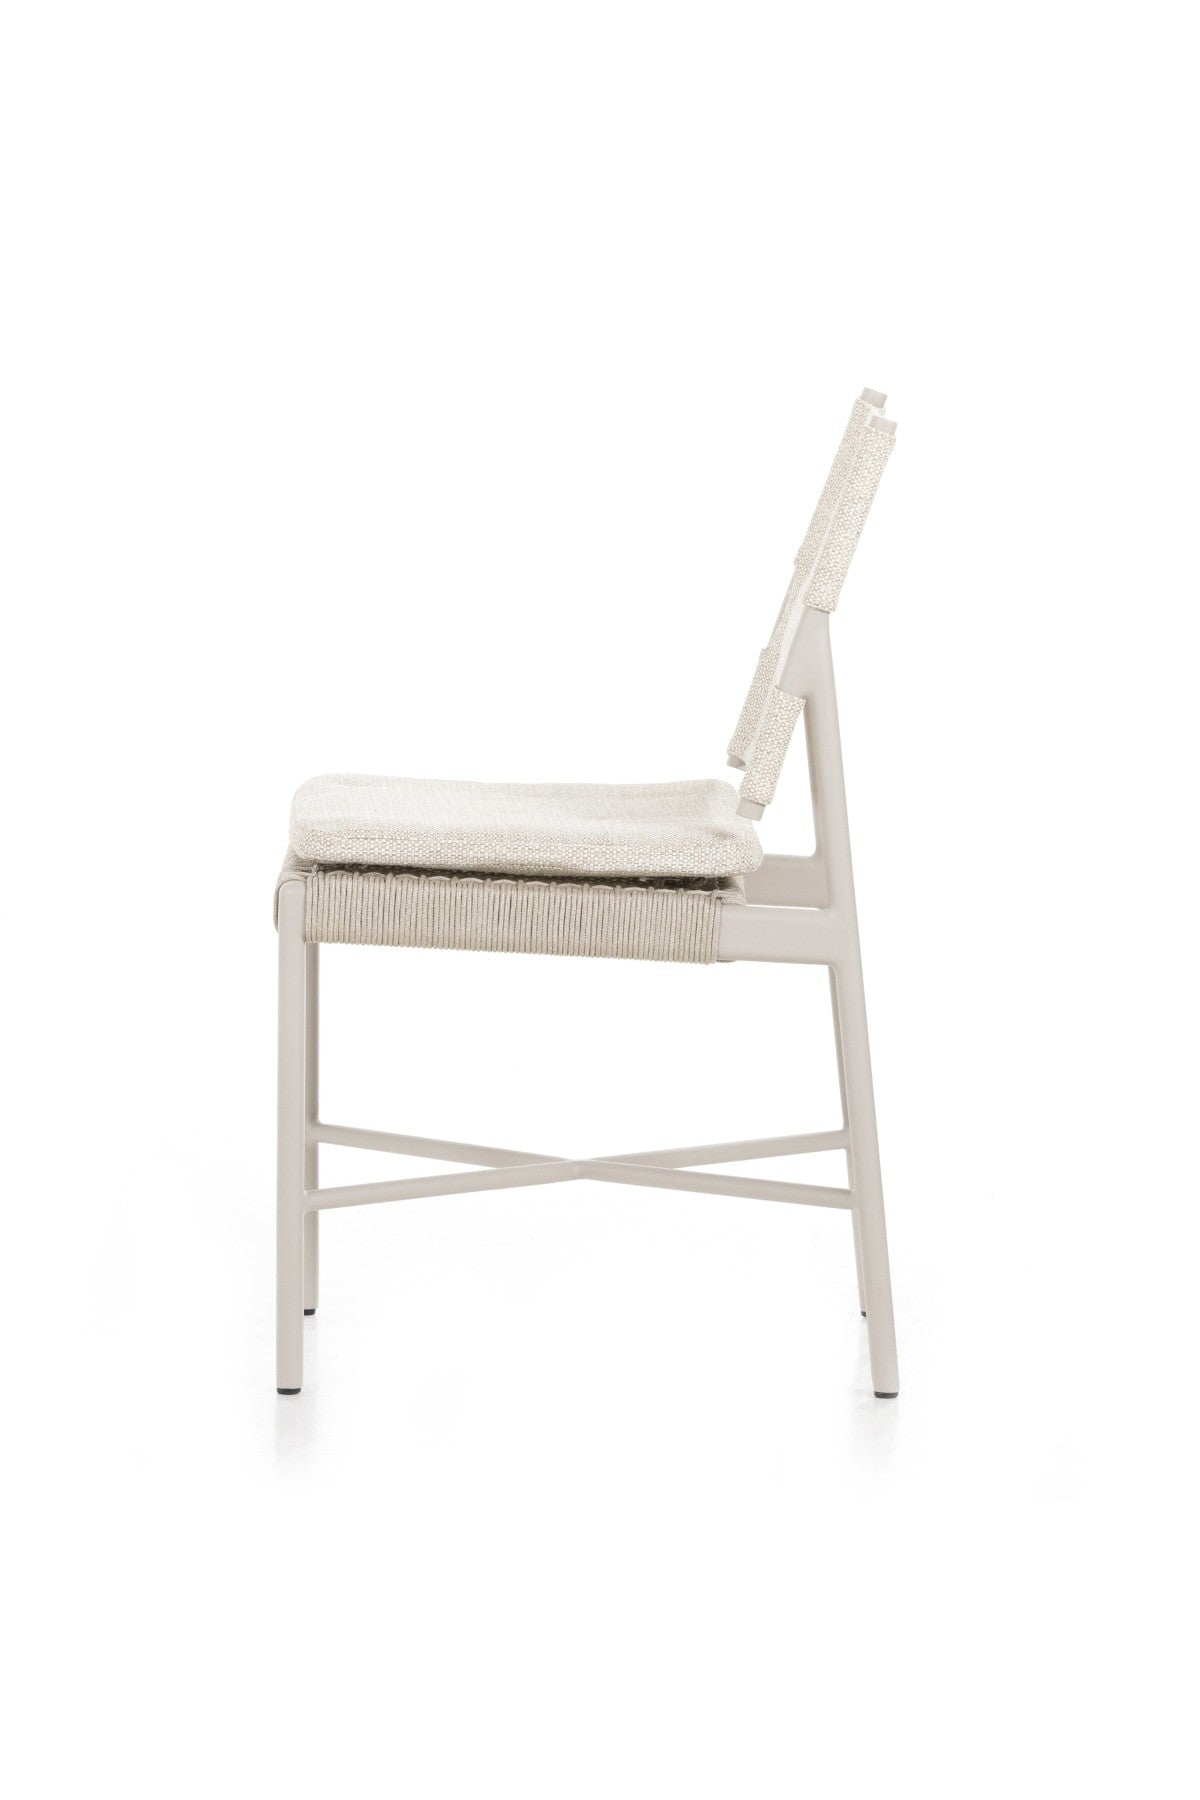 Portico Outdoor Dining Chair